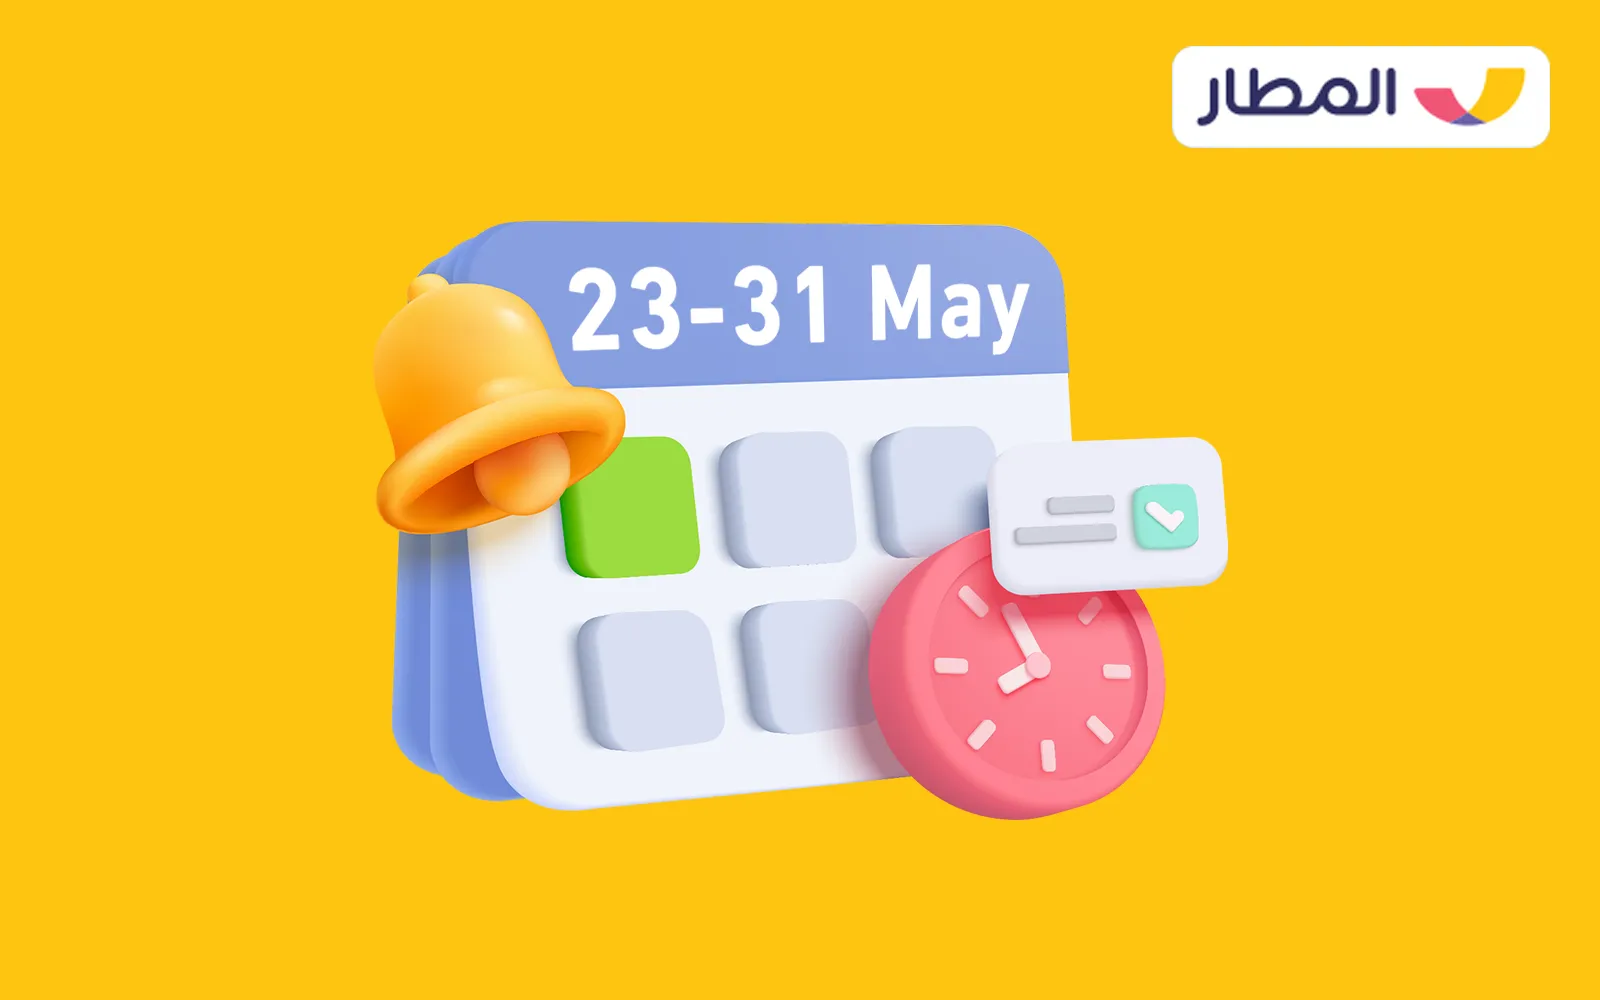 about almatar week offers from 23 May to 31 May